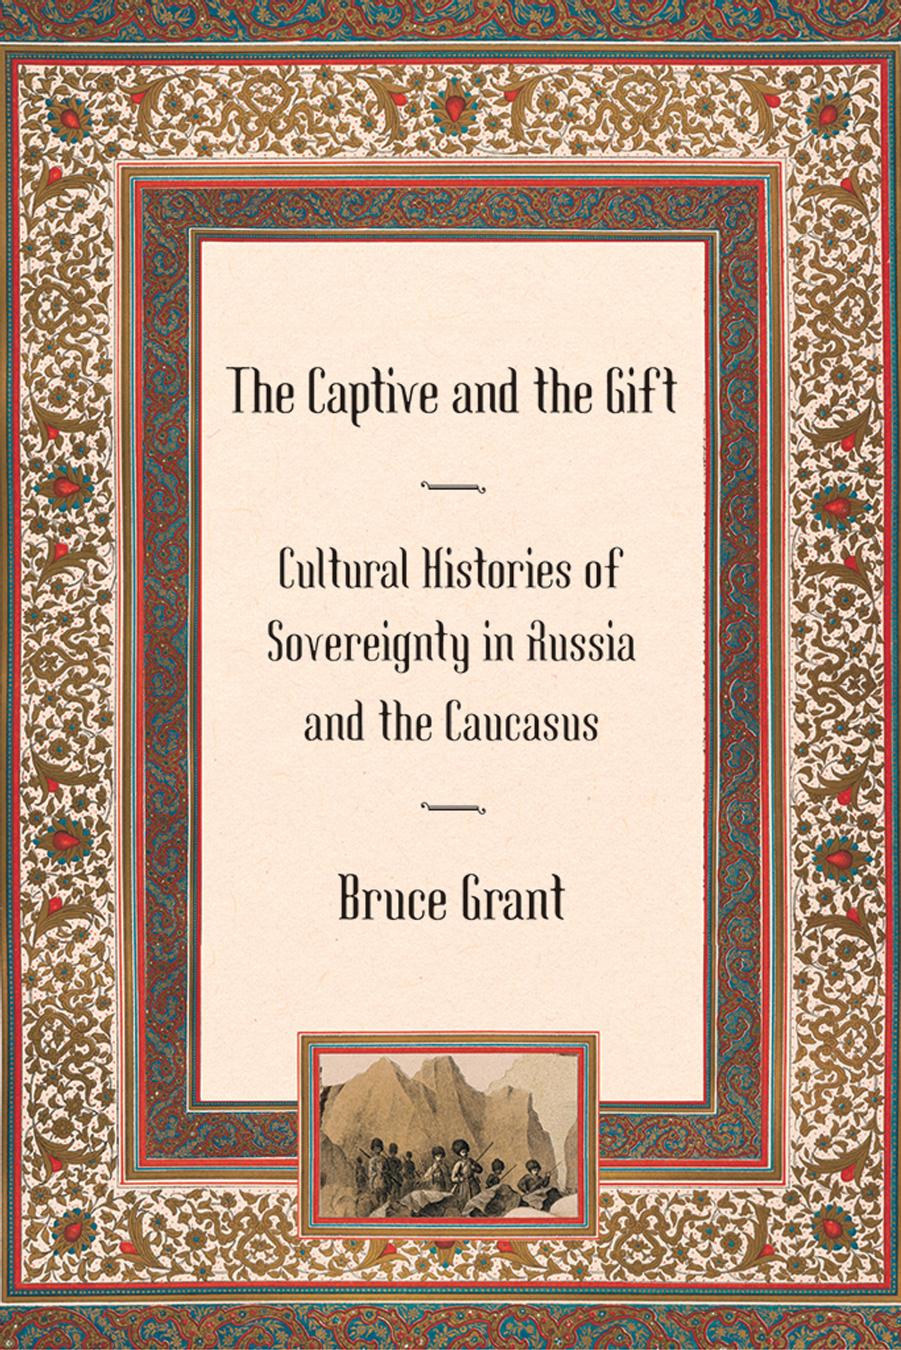 The Captive and the Gift: Cultural Histories of Sovereignty in Russia and the Caucasus by by Bruce Grant